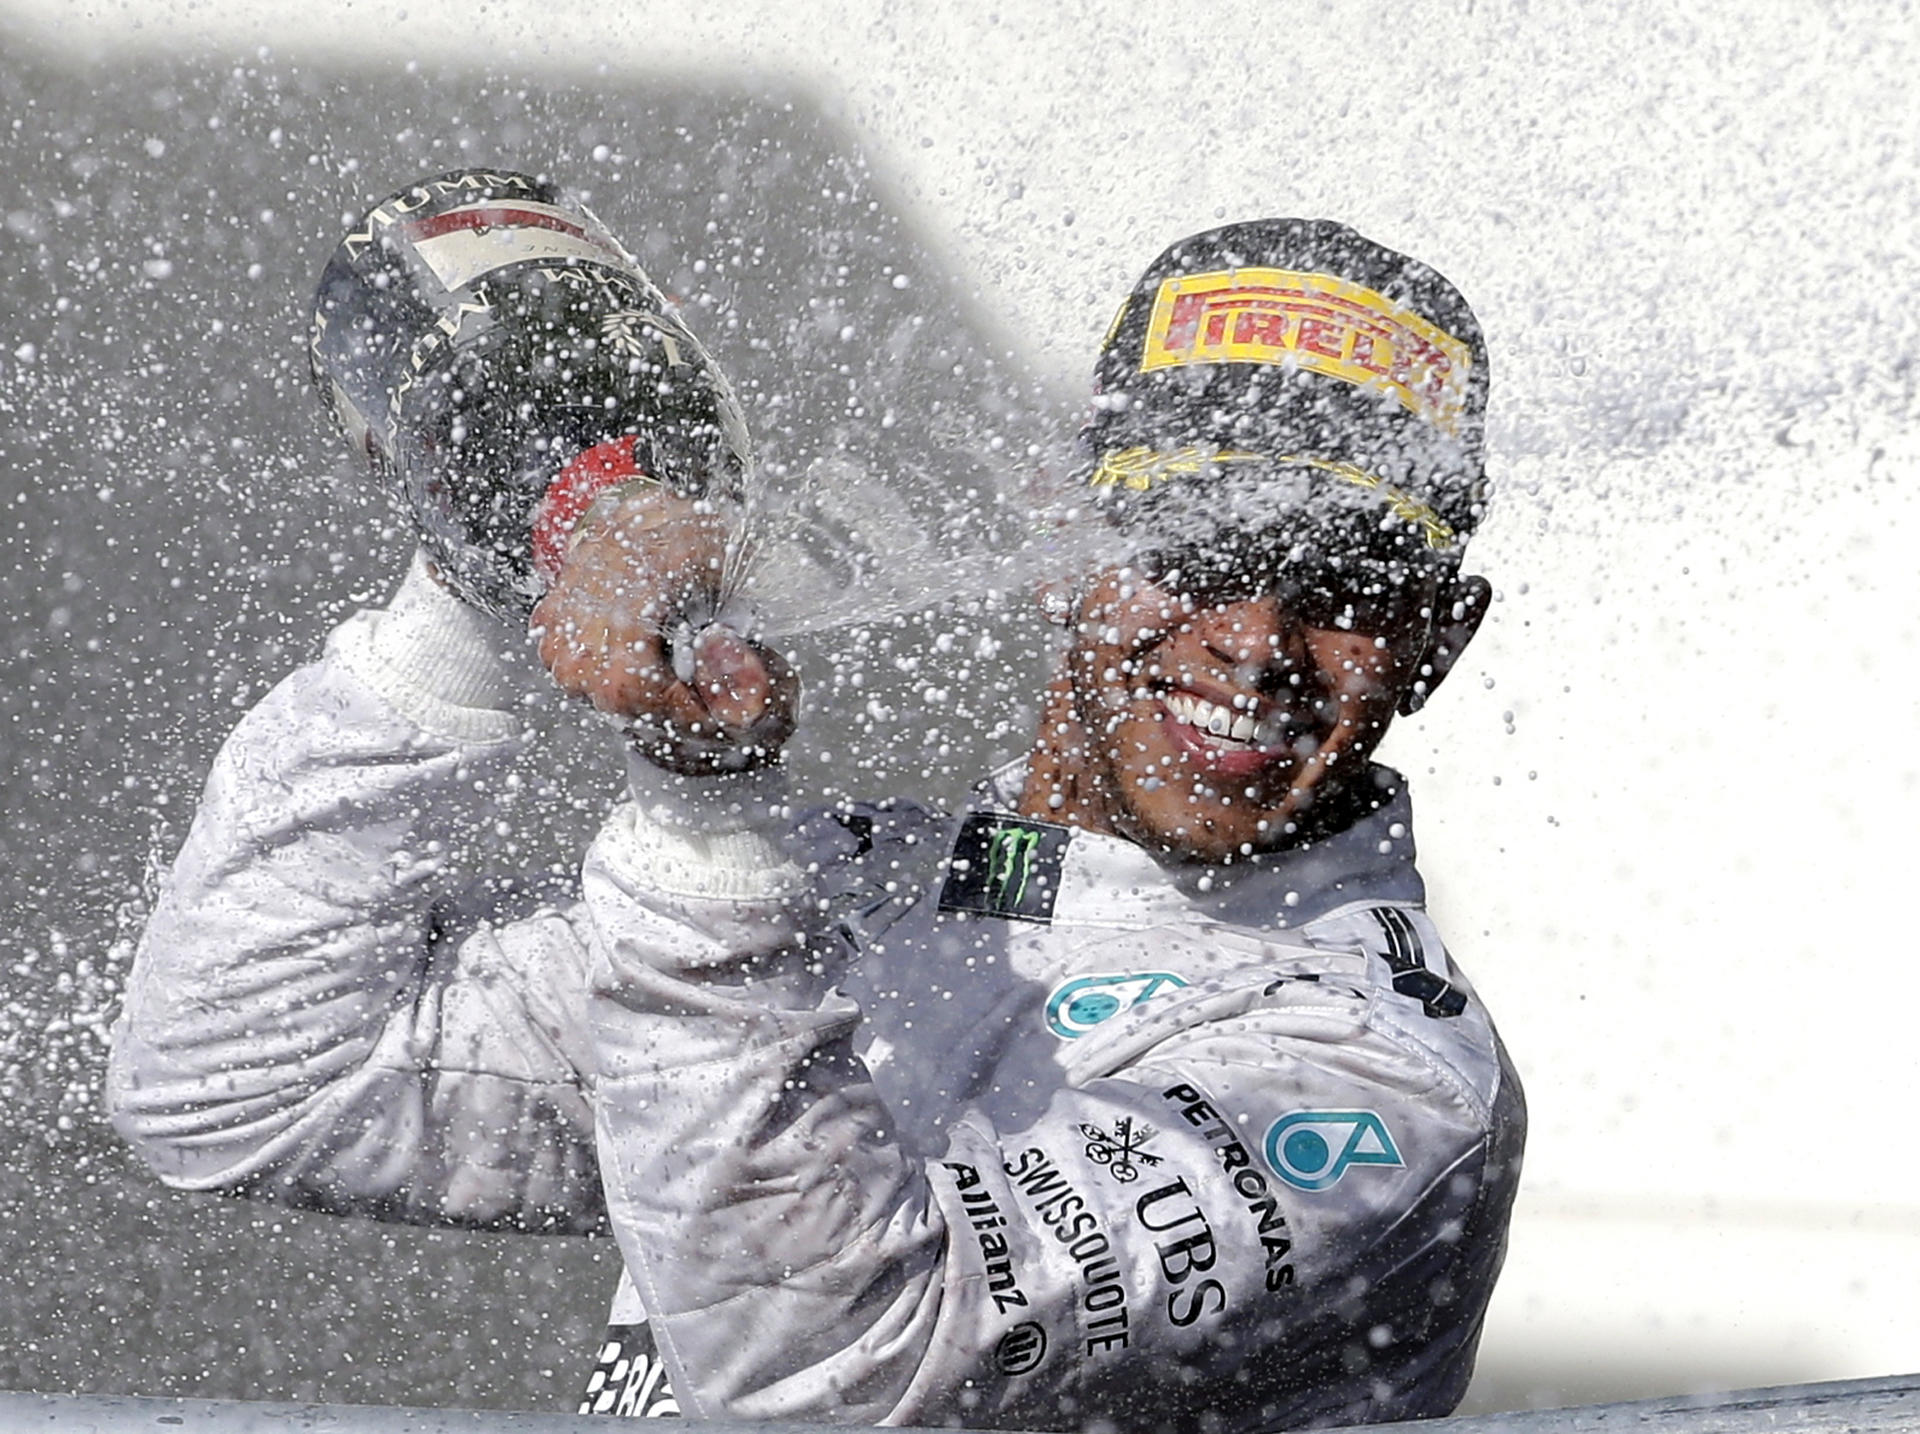 Mercedes driver Lewis Hamilton sprays champagne after winning the Formula One US Grand Prix. Winning races means more money for teams. Photo: AP 
